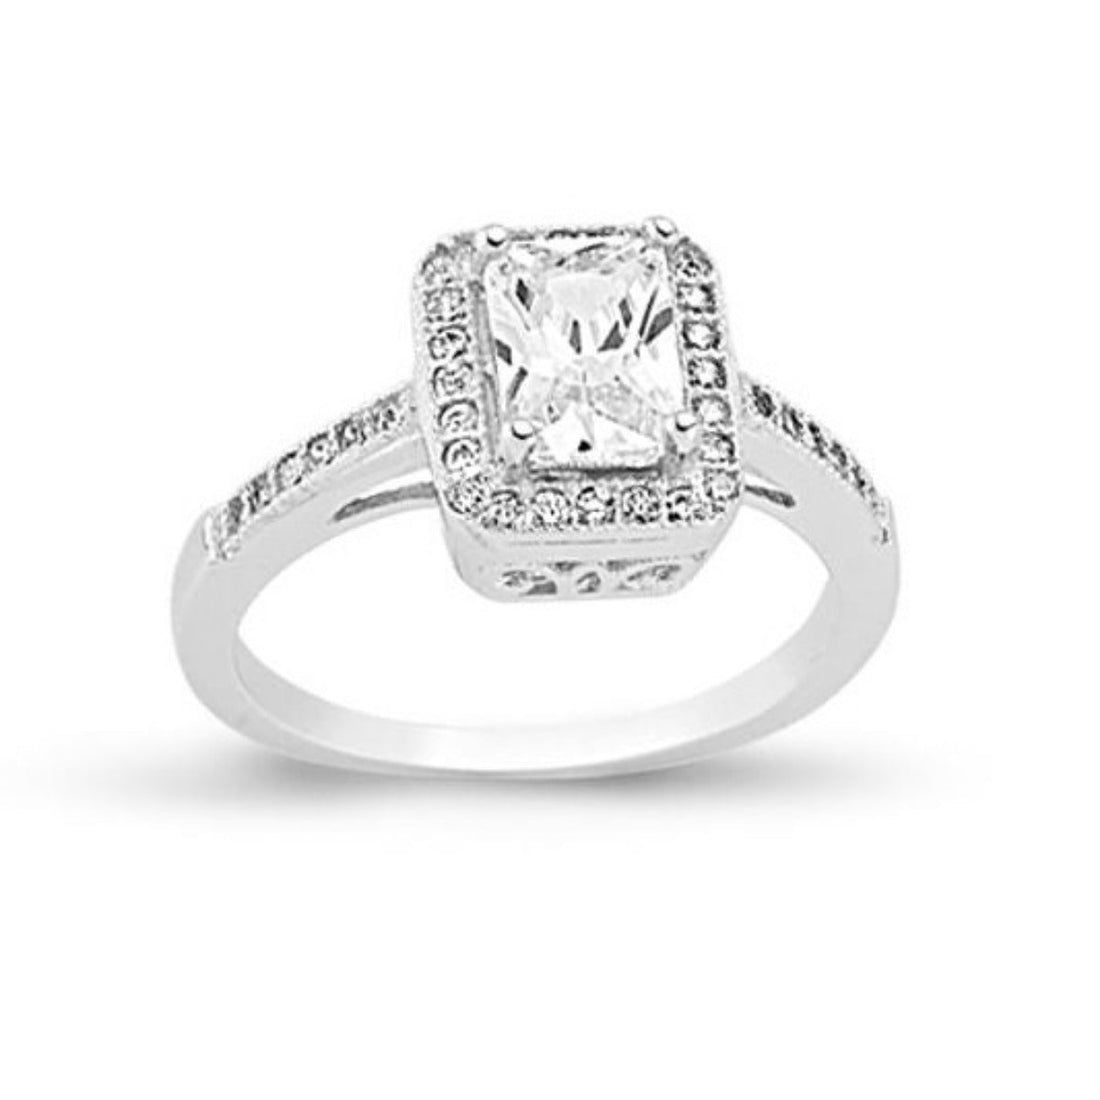 Emerald Cut Cubic Zirconia Halo Engagement Ring in Rhodium Plated Silver